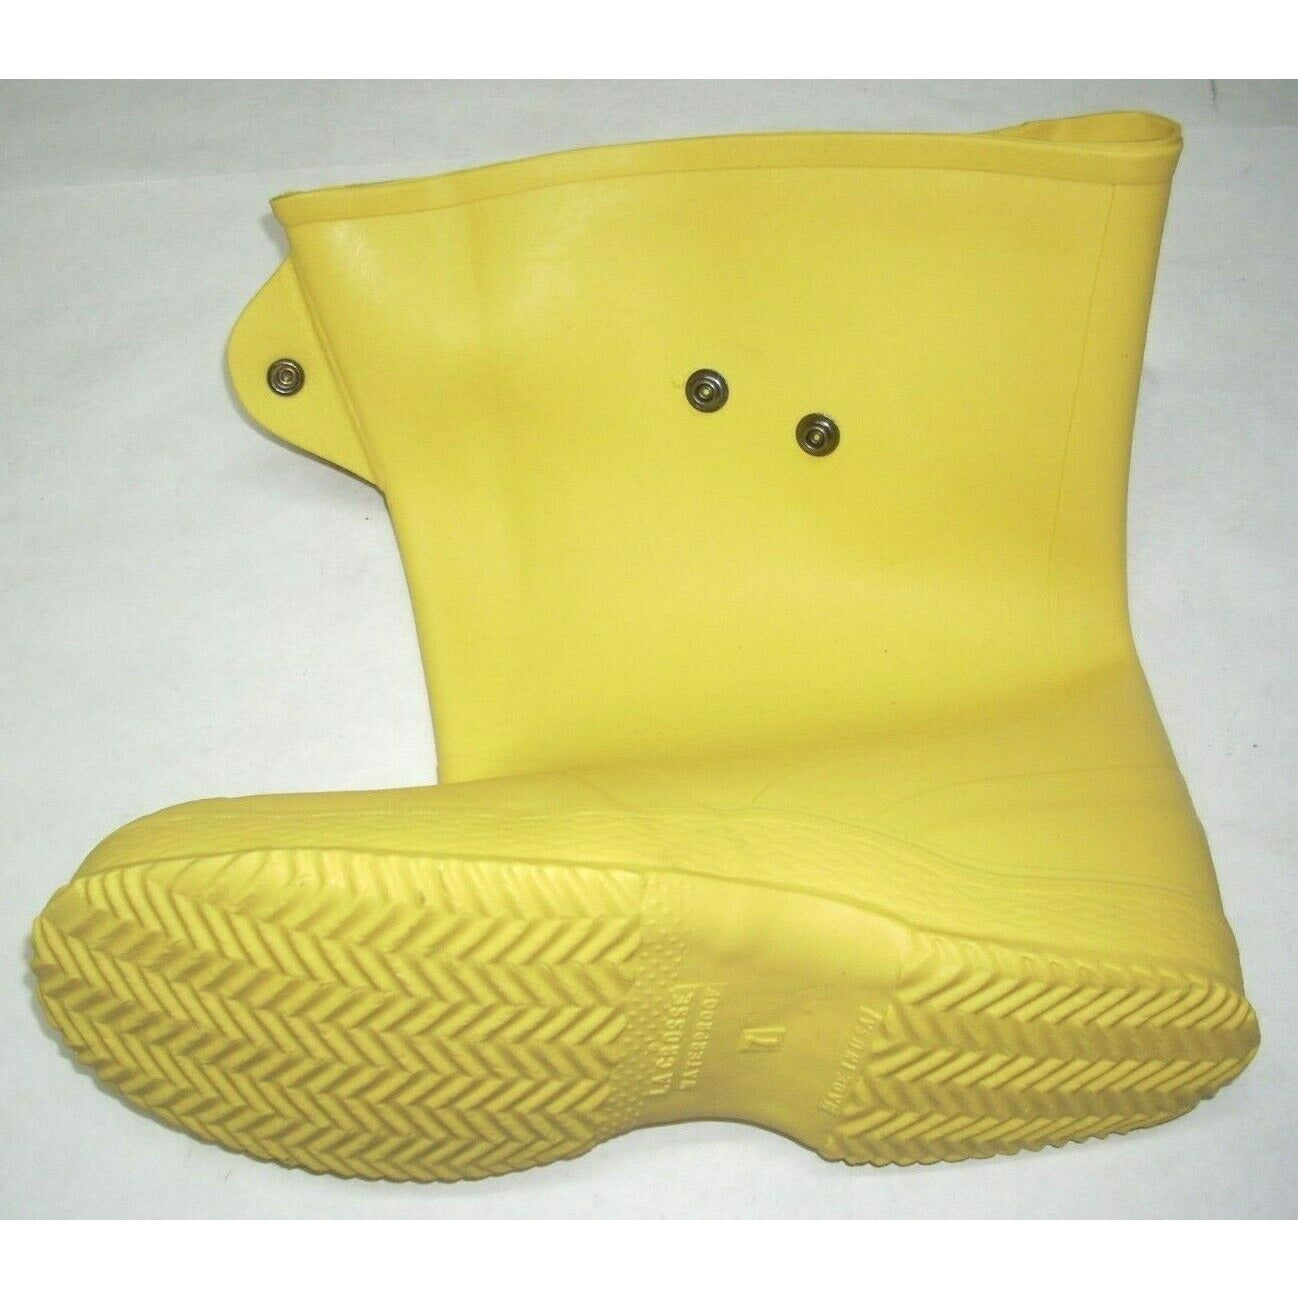 Lacrosse 88303 Men's Packer Yellow Overshoe Boots Size 7 USA Made